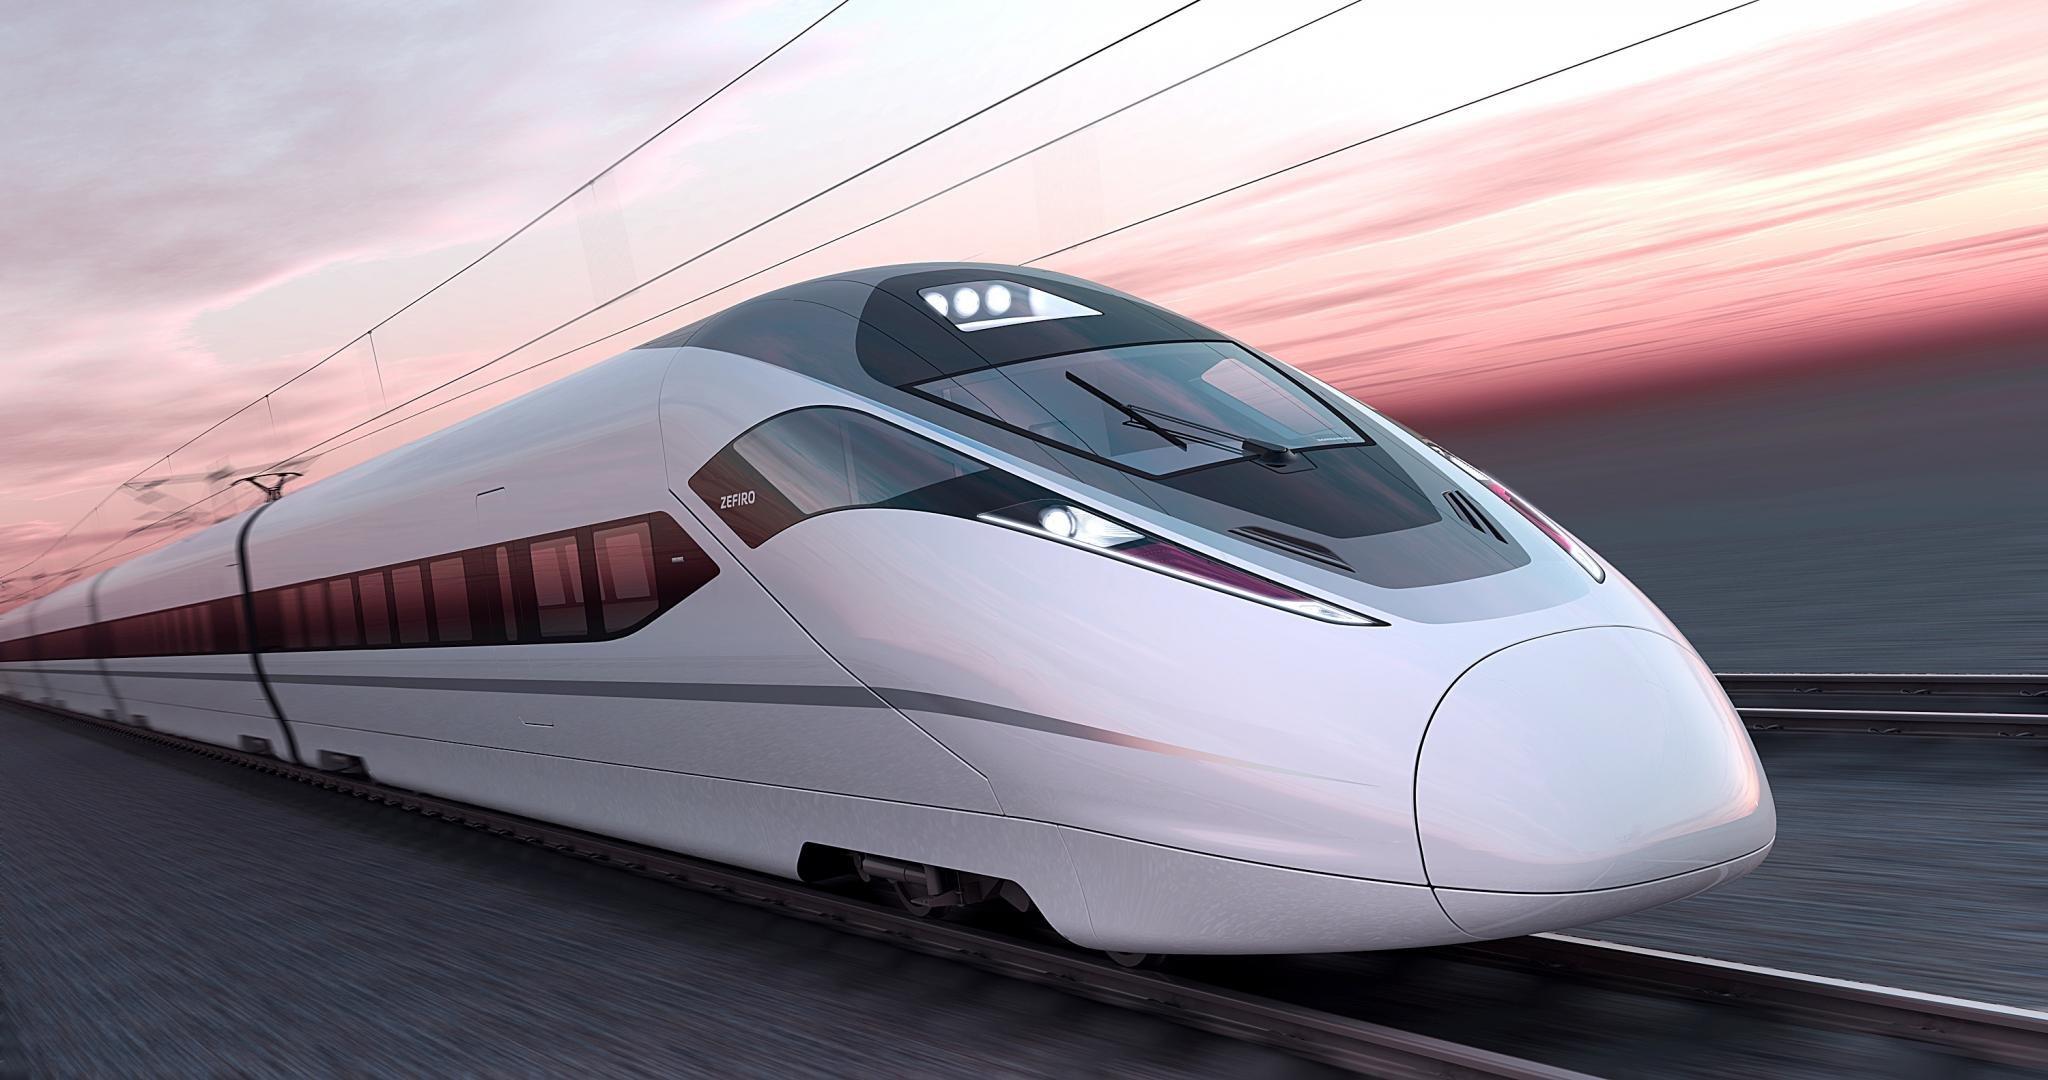 Download Bullet Train wallpapers for mobile phone free Bullet Train HD  pictures